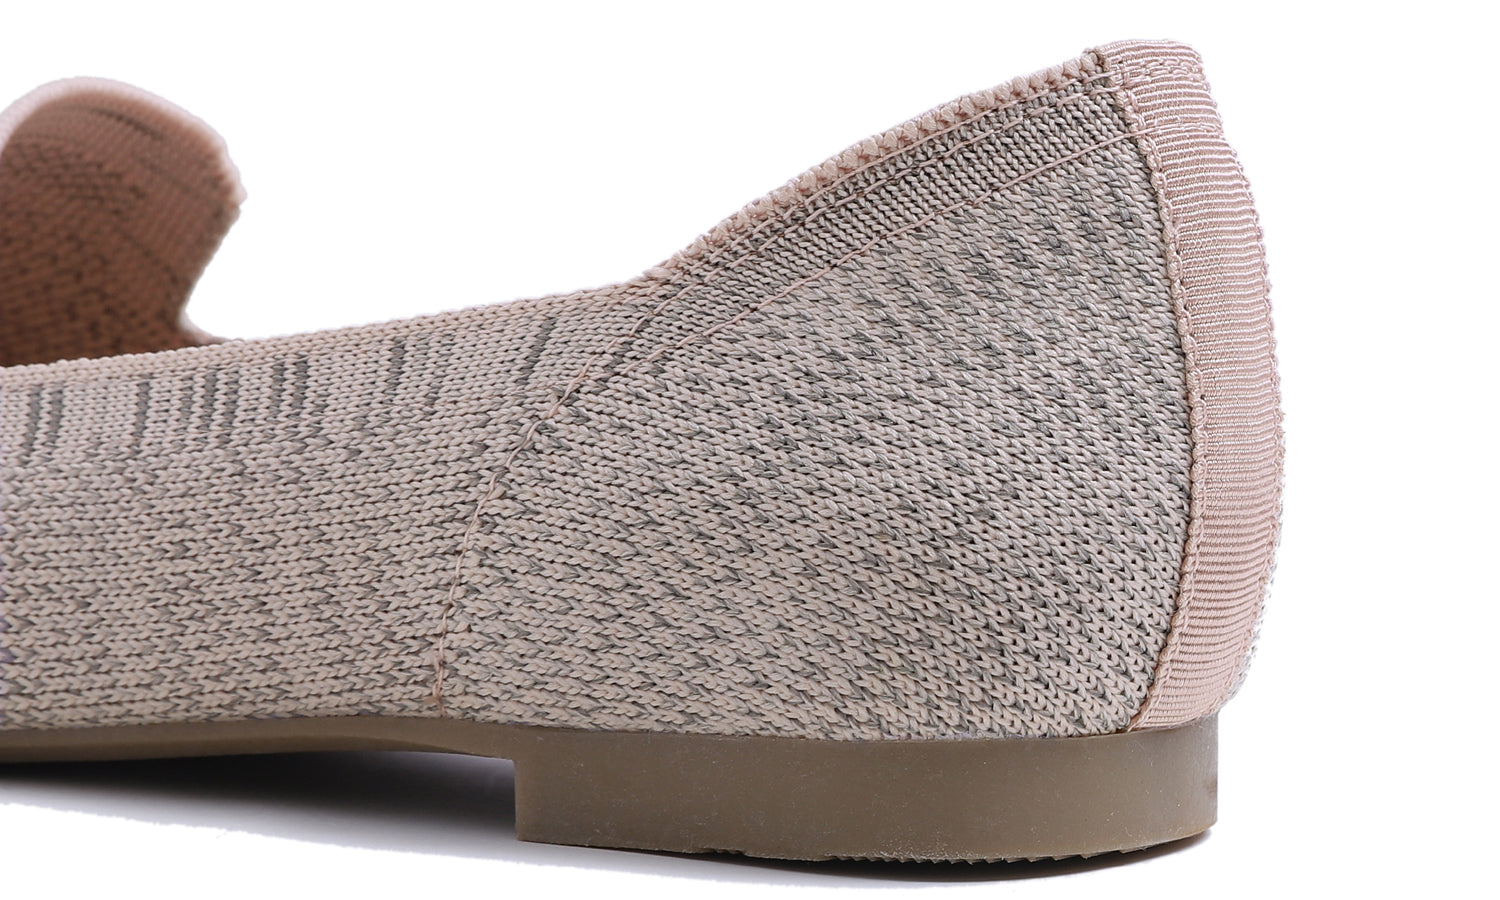 Feversole Women's Woven Fashion Breathable Knit Flat Shoes Grey Mixed Loafer